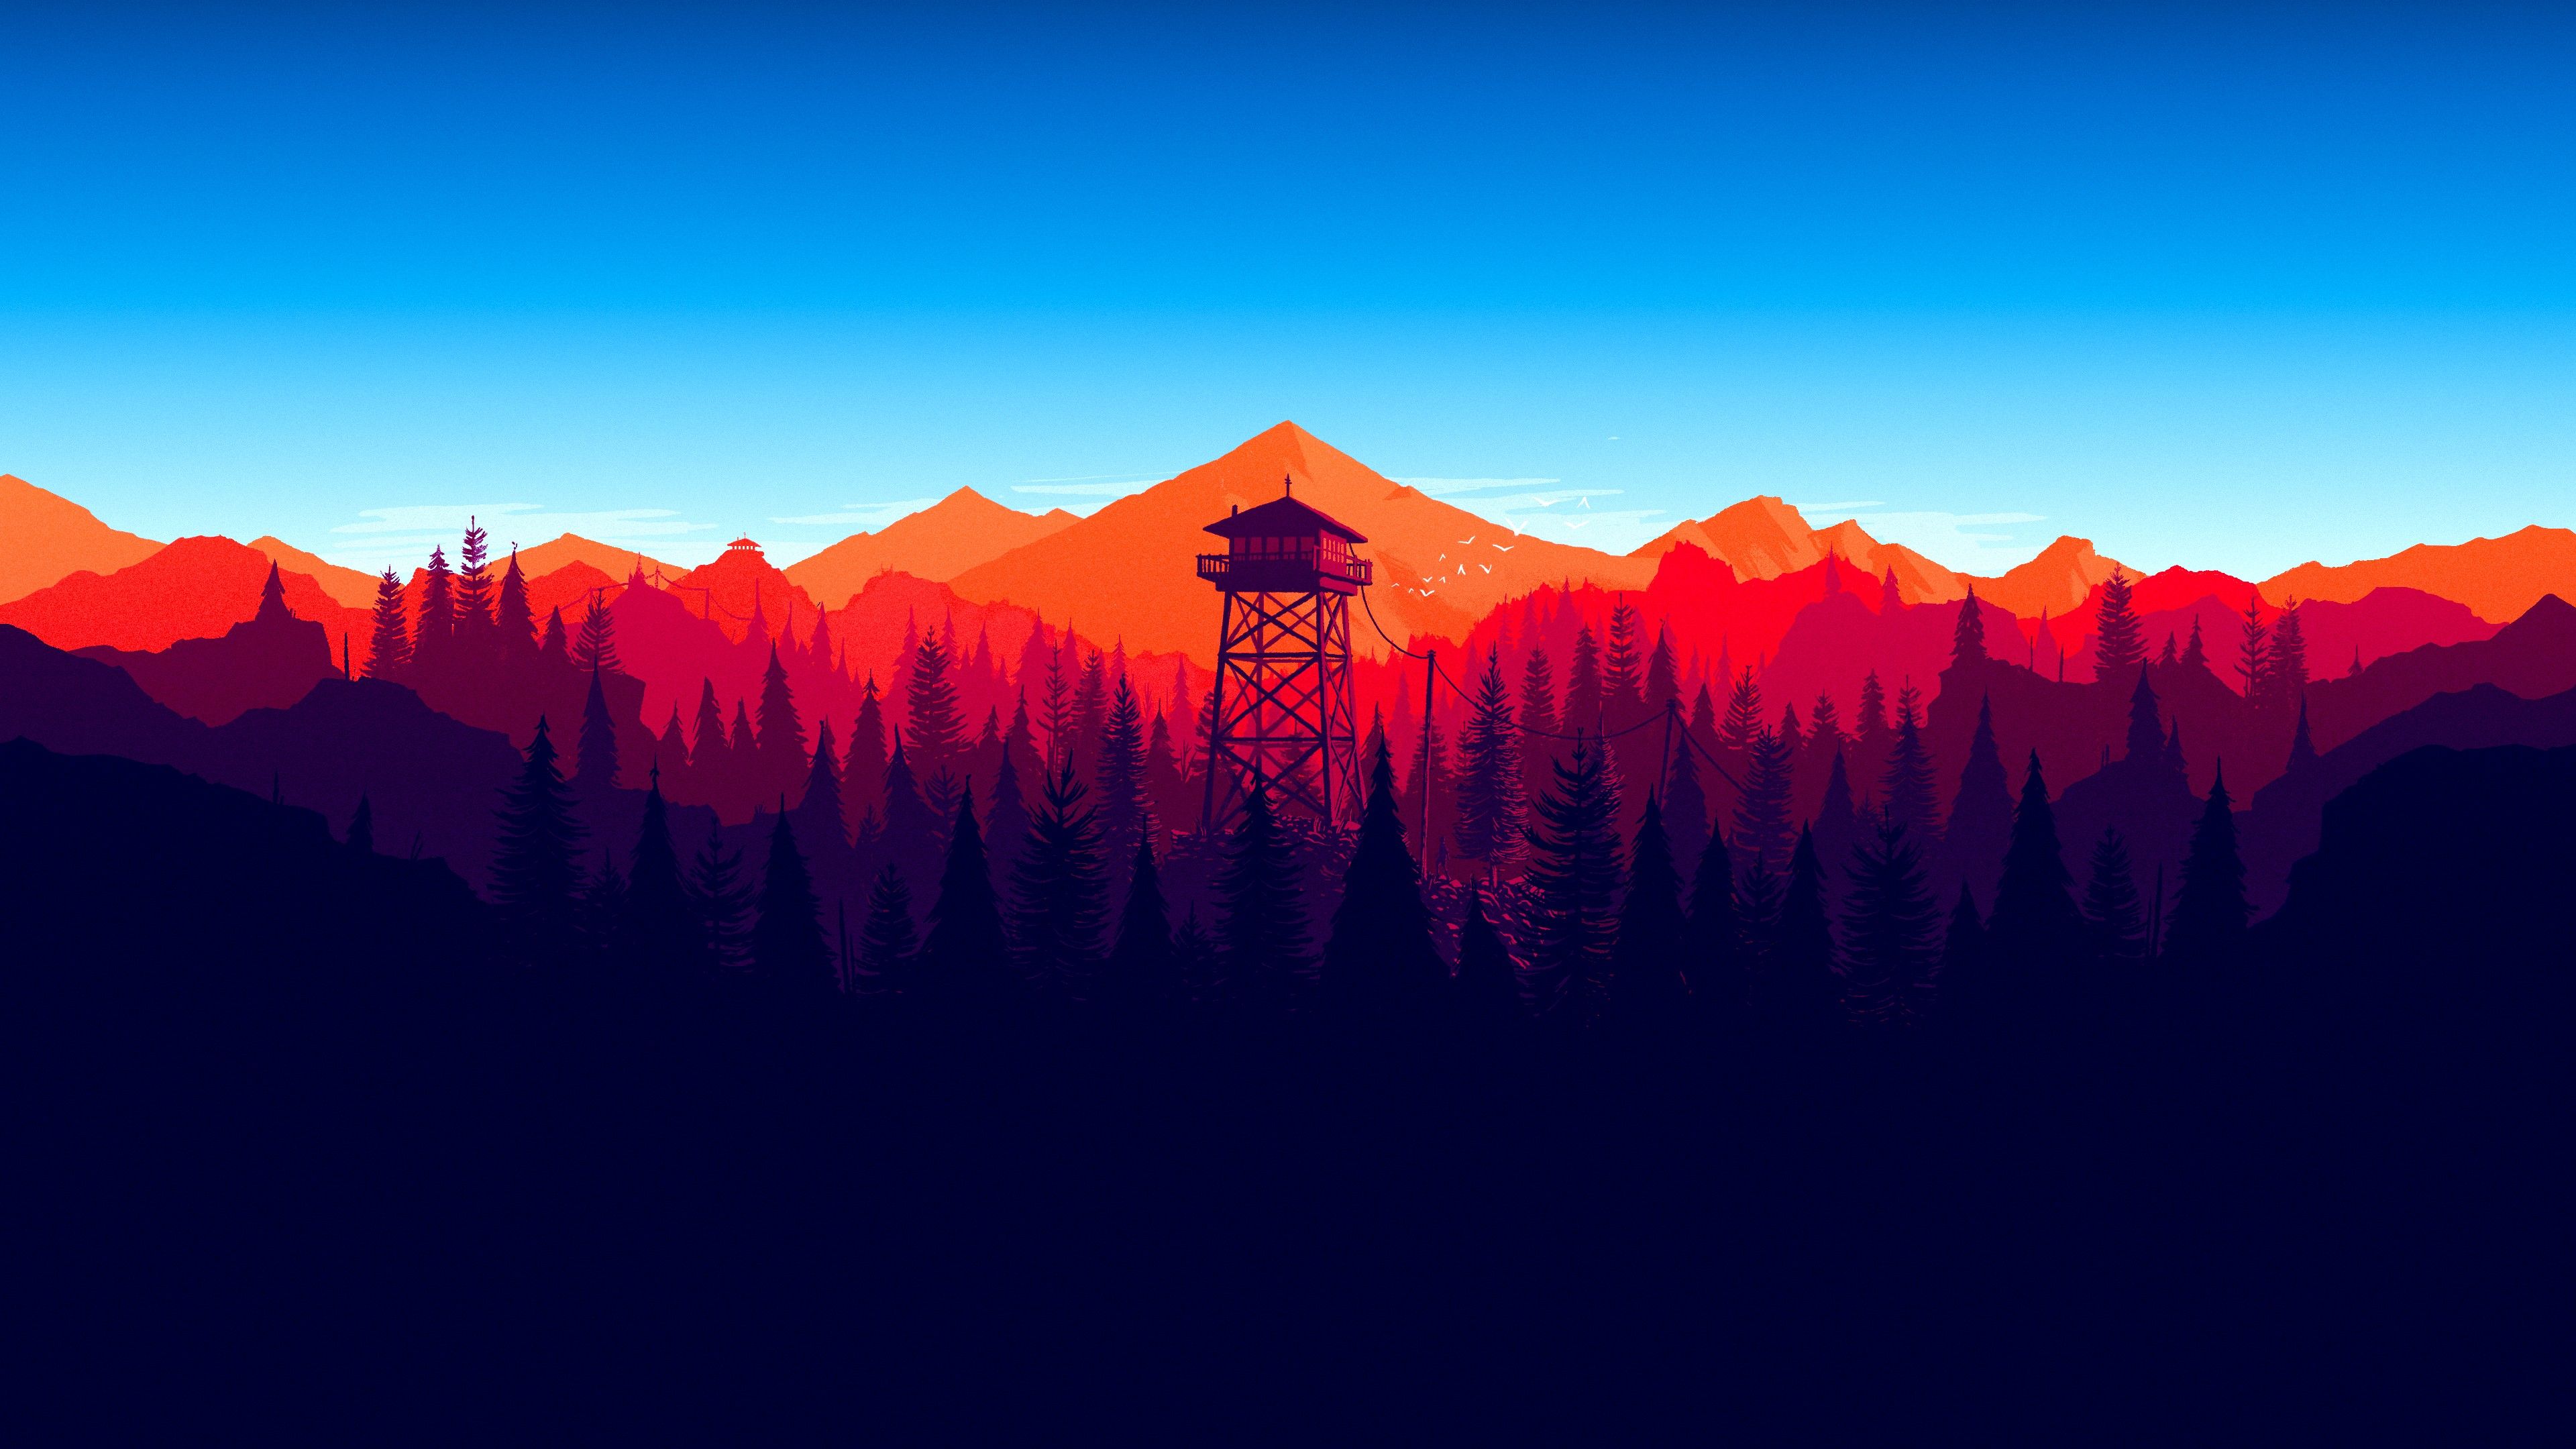 Firewatch 4K wallpapers for your desktop or mobile screen free and easy to download